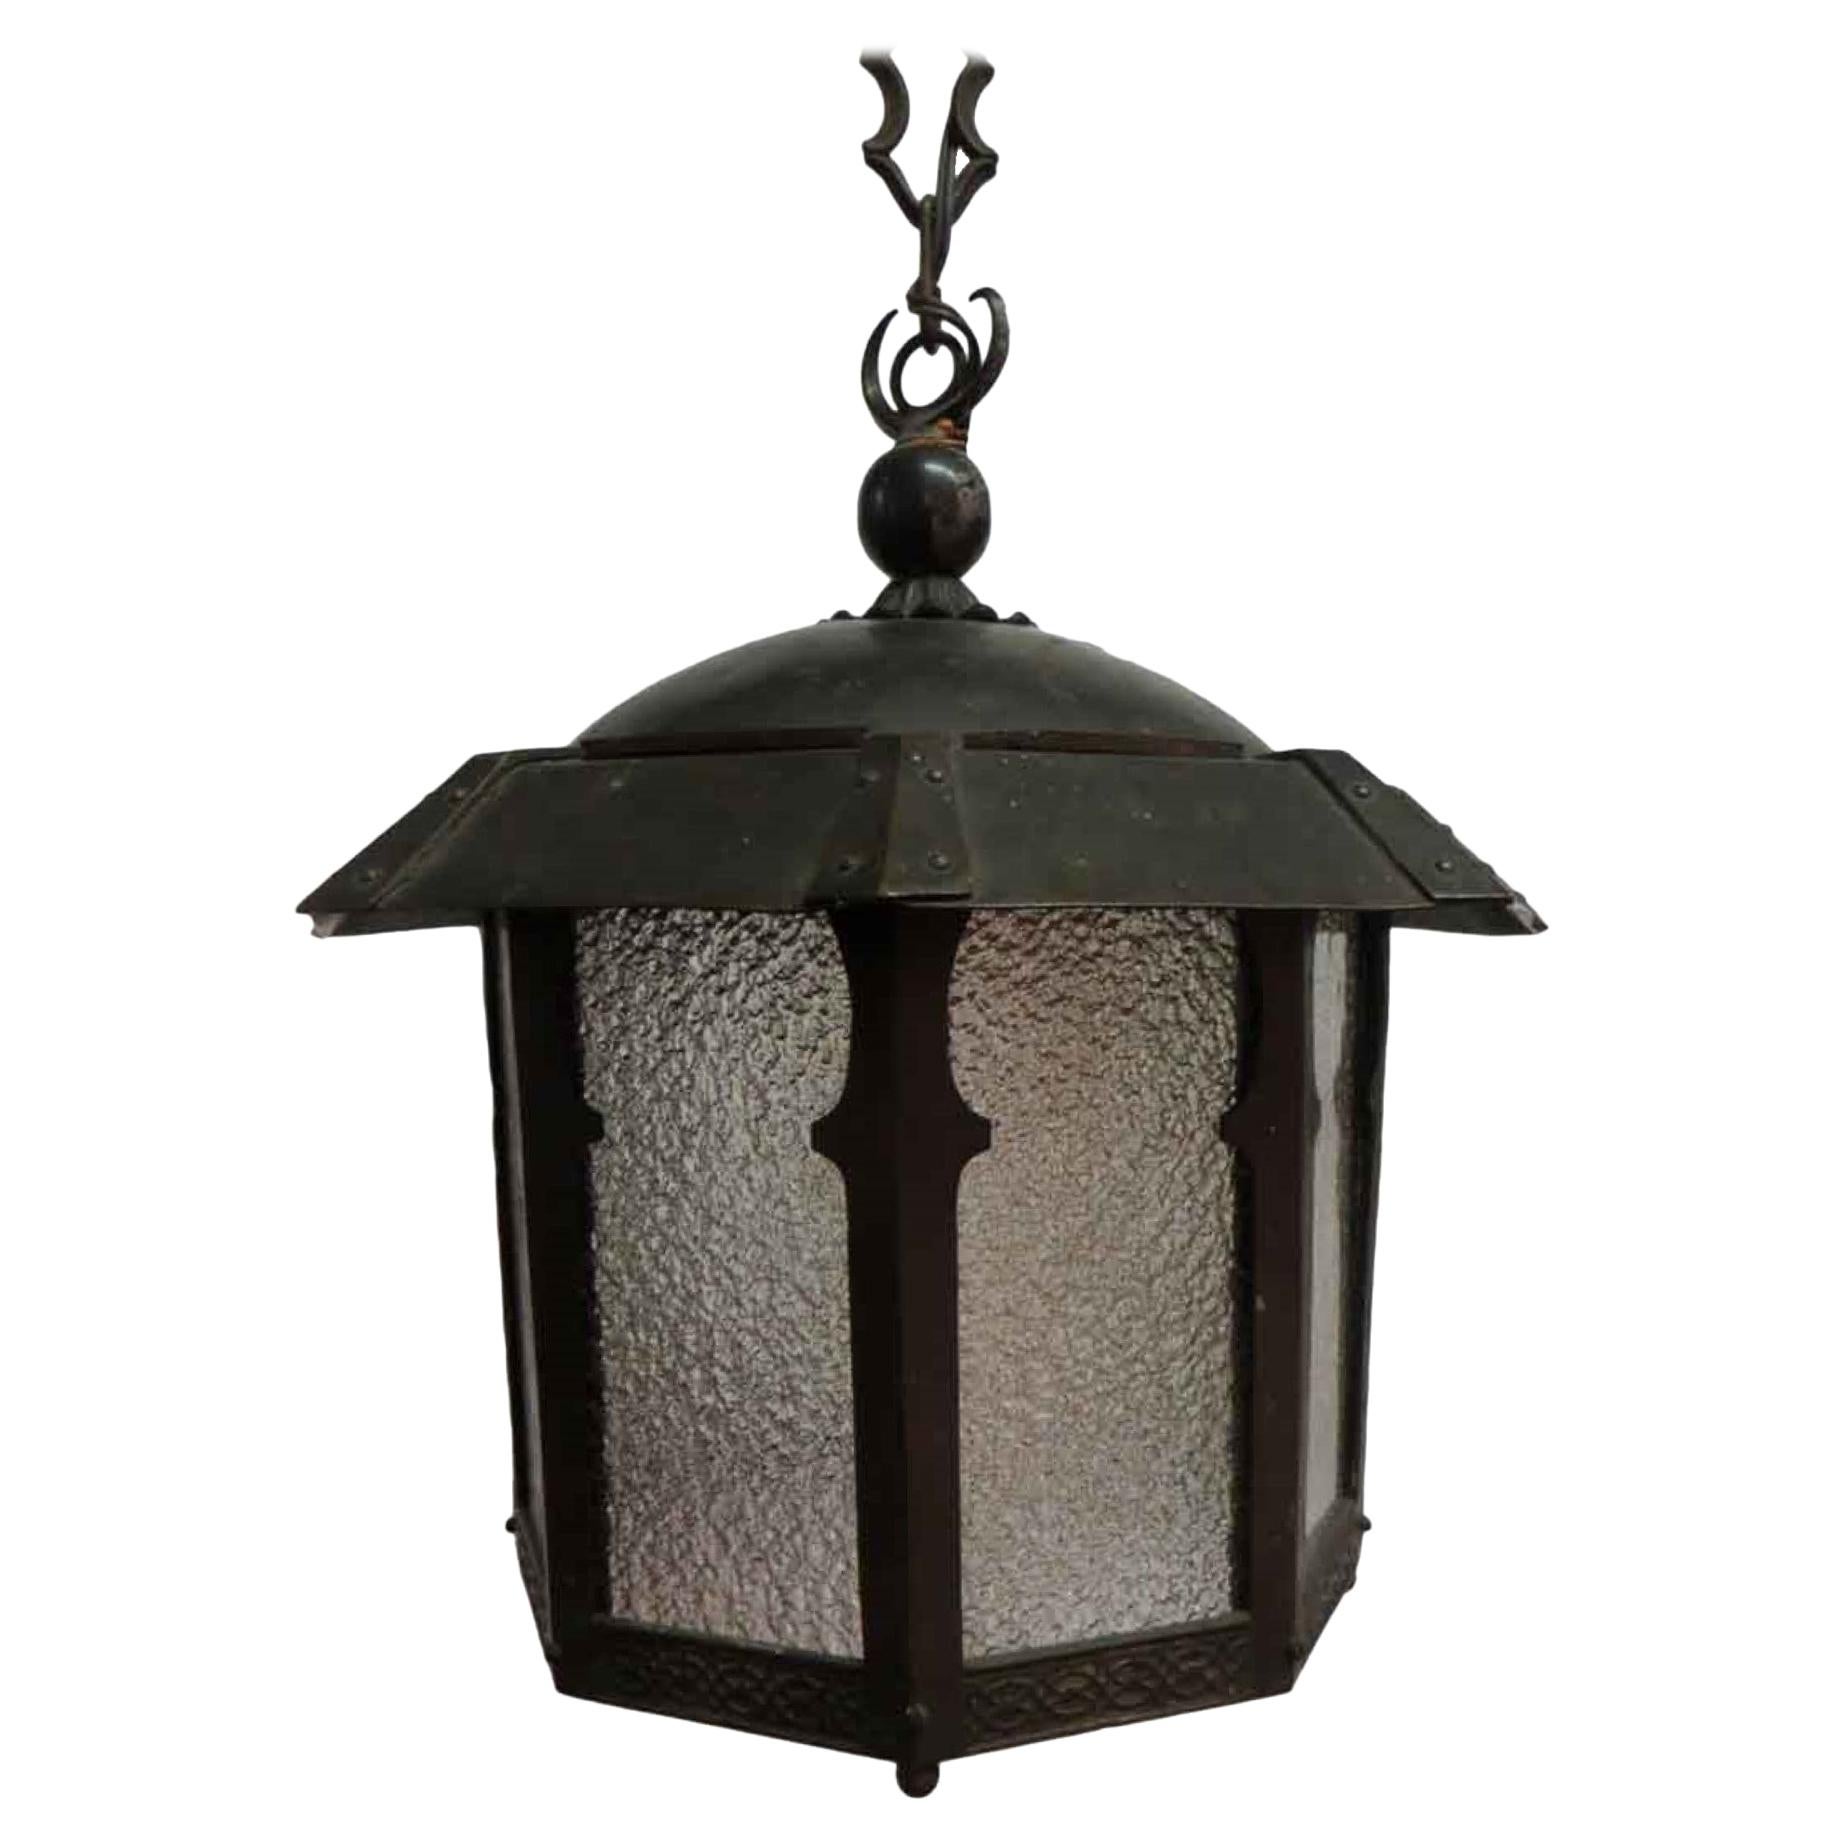 1910s Arts & Crafts Copper Foyer Pendant Lantern with Textured Glass